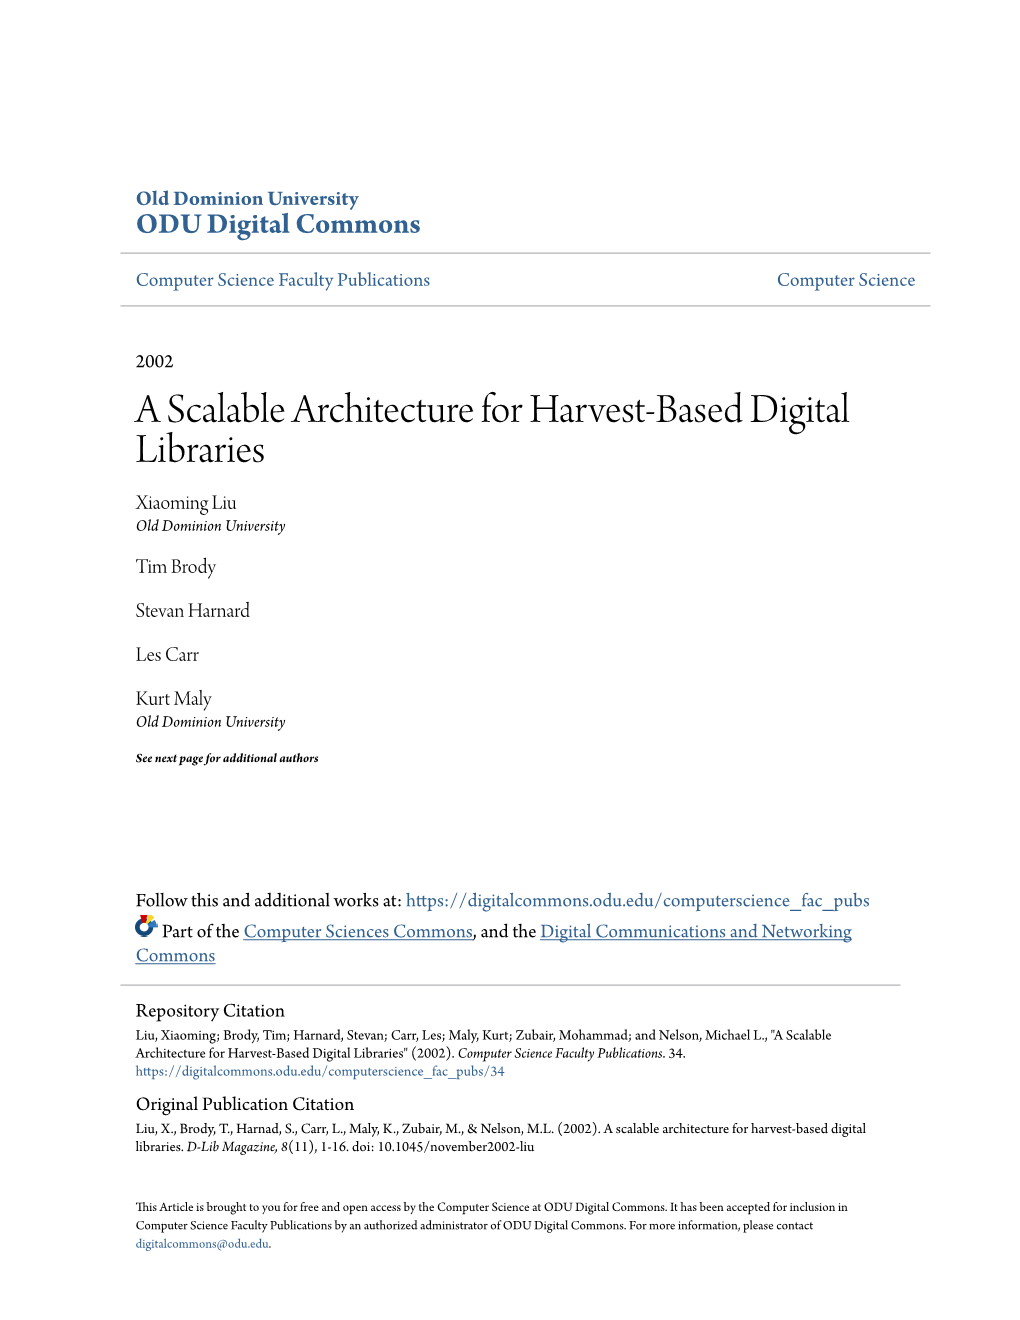 A Scalable Architecture for Harvest-Based Digital Libraries Xiaoming Liu Old Dominion University